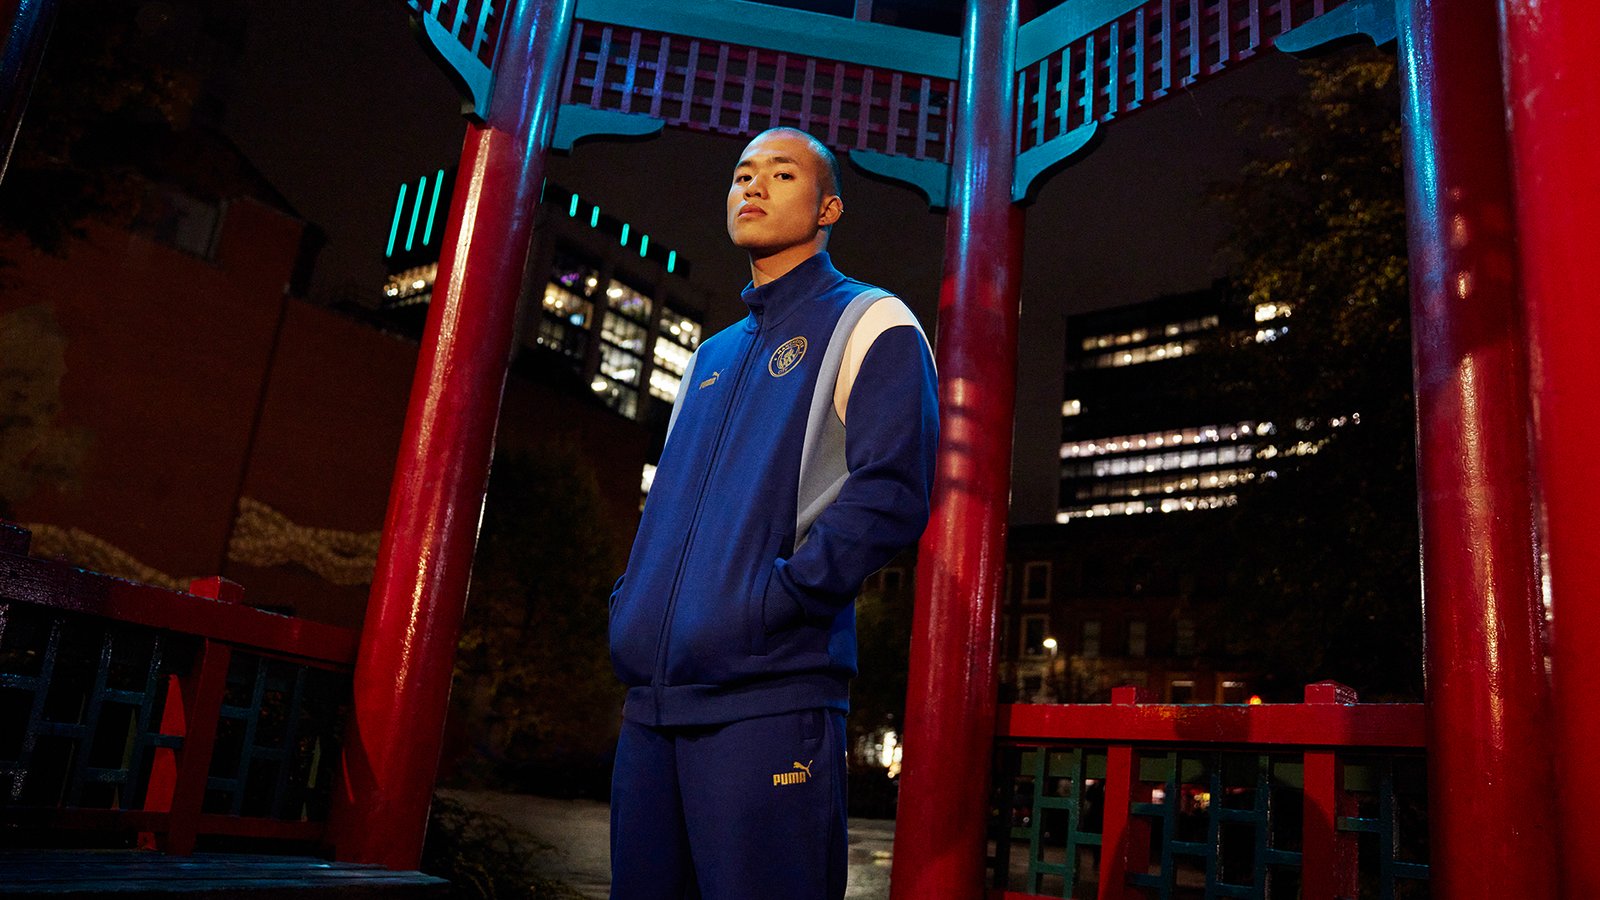 TO THE MOON AND BACK. PUMA LAUNCHES MANCHESTER CITY CHINESE NEW YEAR COLLECTION © Copyright PLPG GLOBAL MEDIA 2023